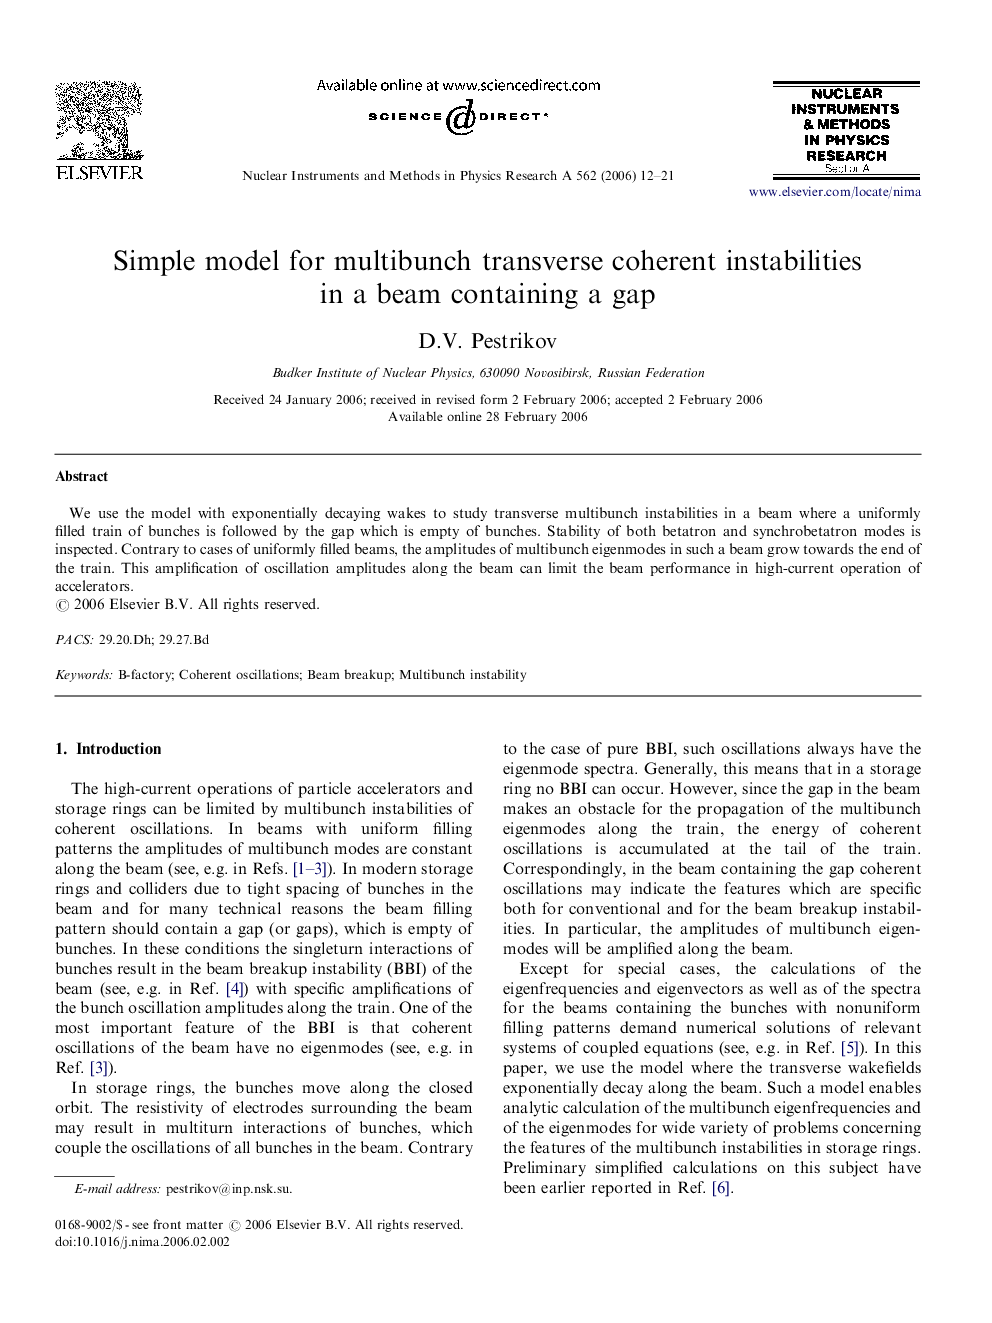 Simple model for multibunch transverse coherent instabilities in a beam containing a gap